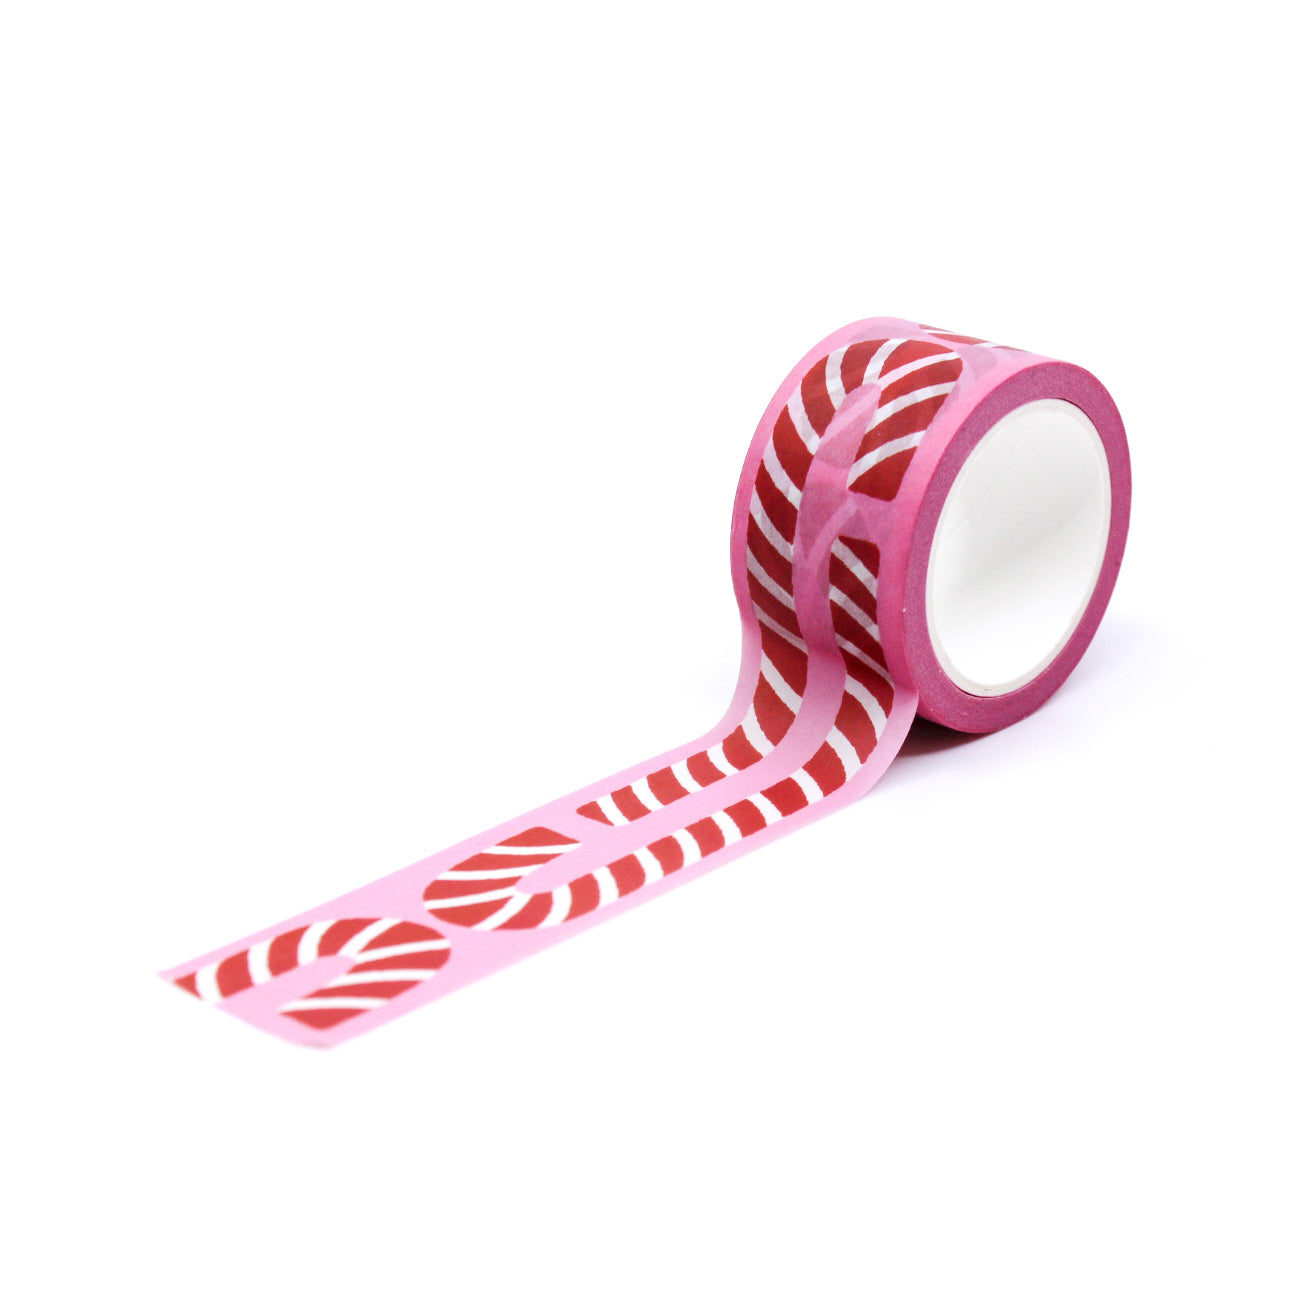 Sweet Tooth Candy Cane Washi Tape showcasing delightful candy canes in a whimsical pattern, adding a sugary and festive flair to your crafting or holiday-themed projects. This tape is from Rebecca Jane Woolbright and sold at BBB Supplies Craft Shop.